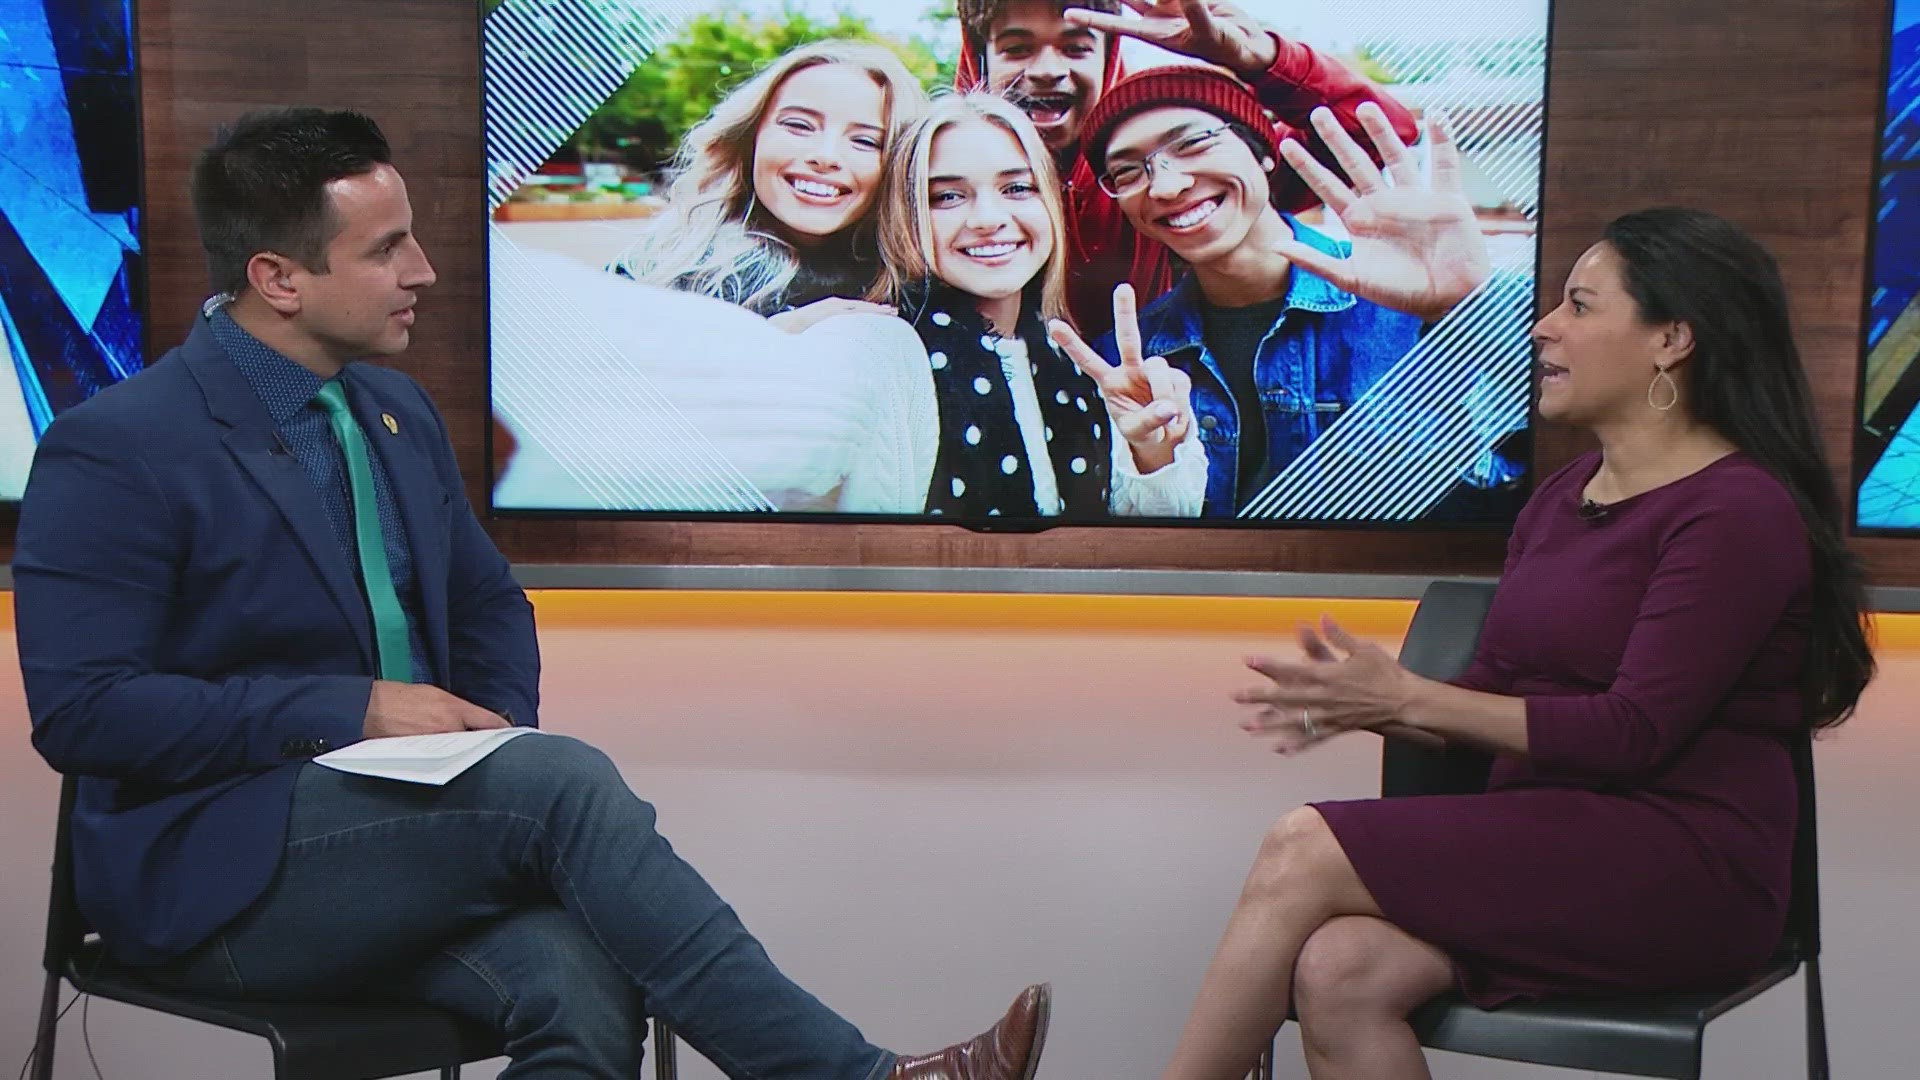 The American Psychological Association has released new recommendations for teens before they use social media. Parenting expert Dr. Sheryl Ziegler explains.